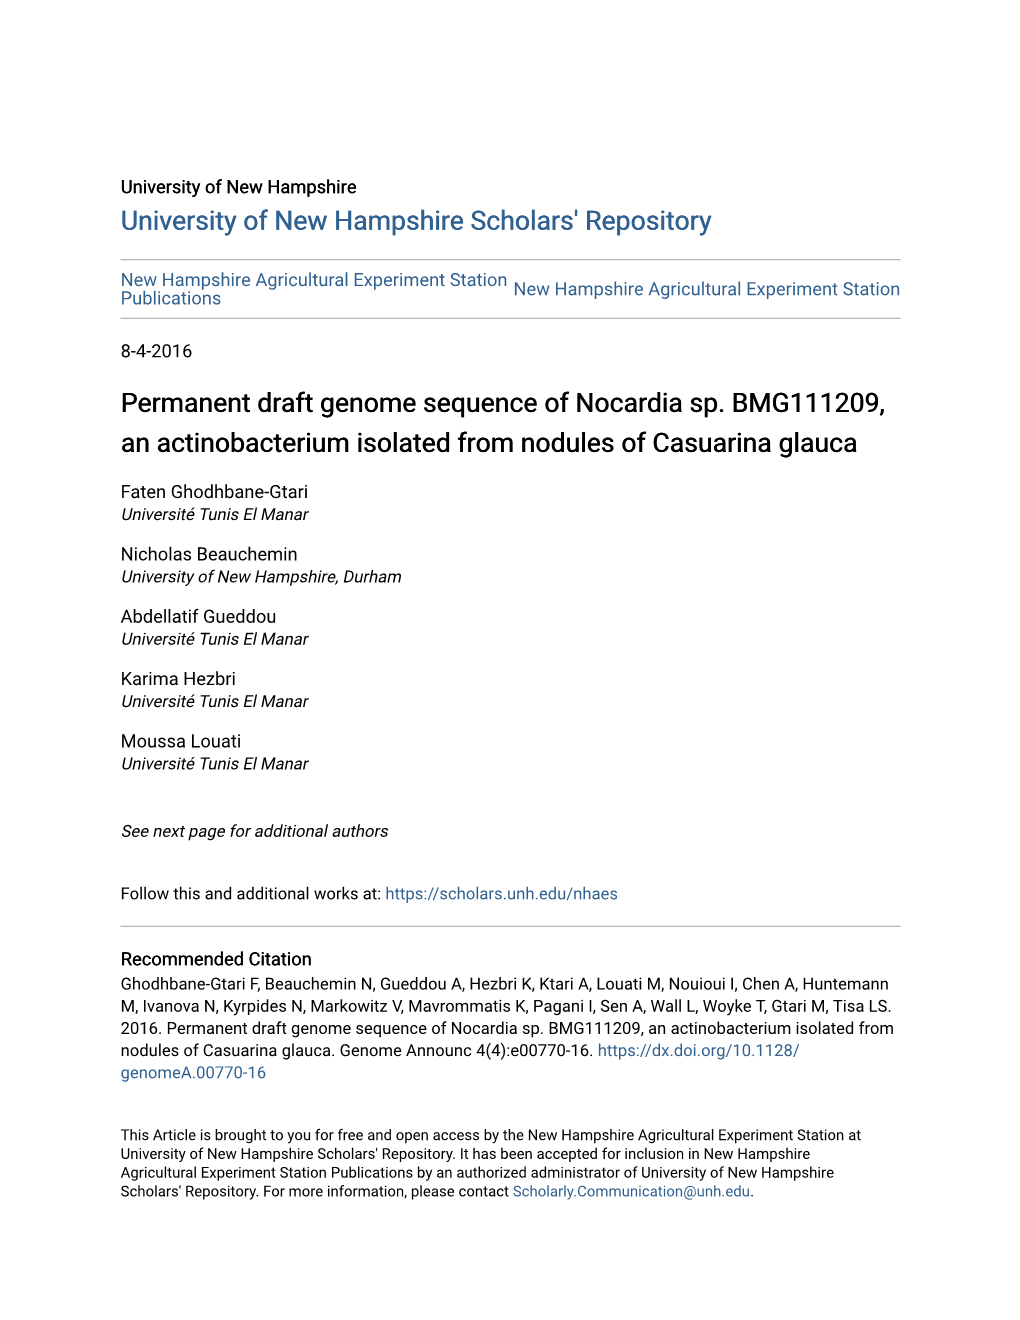 Permanent Draft Genome Sequence of Nocardia Sp. BMG111209, an Actinobacterium Isolated from Nodules of Casuarina Glauca